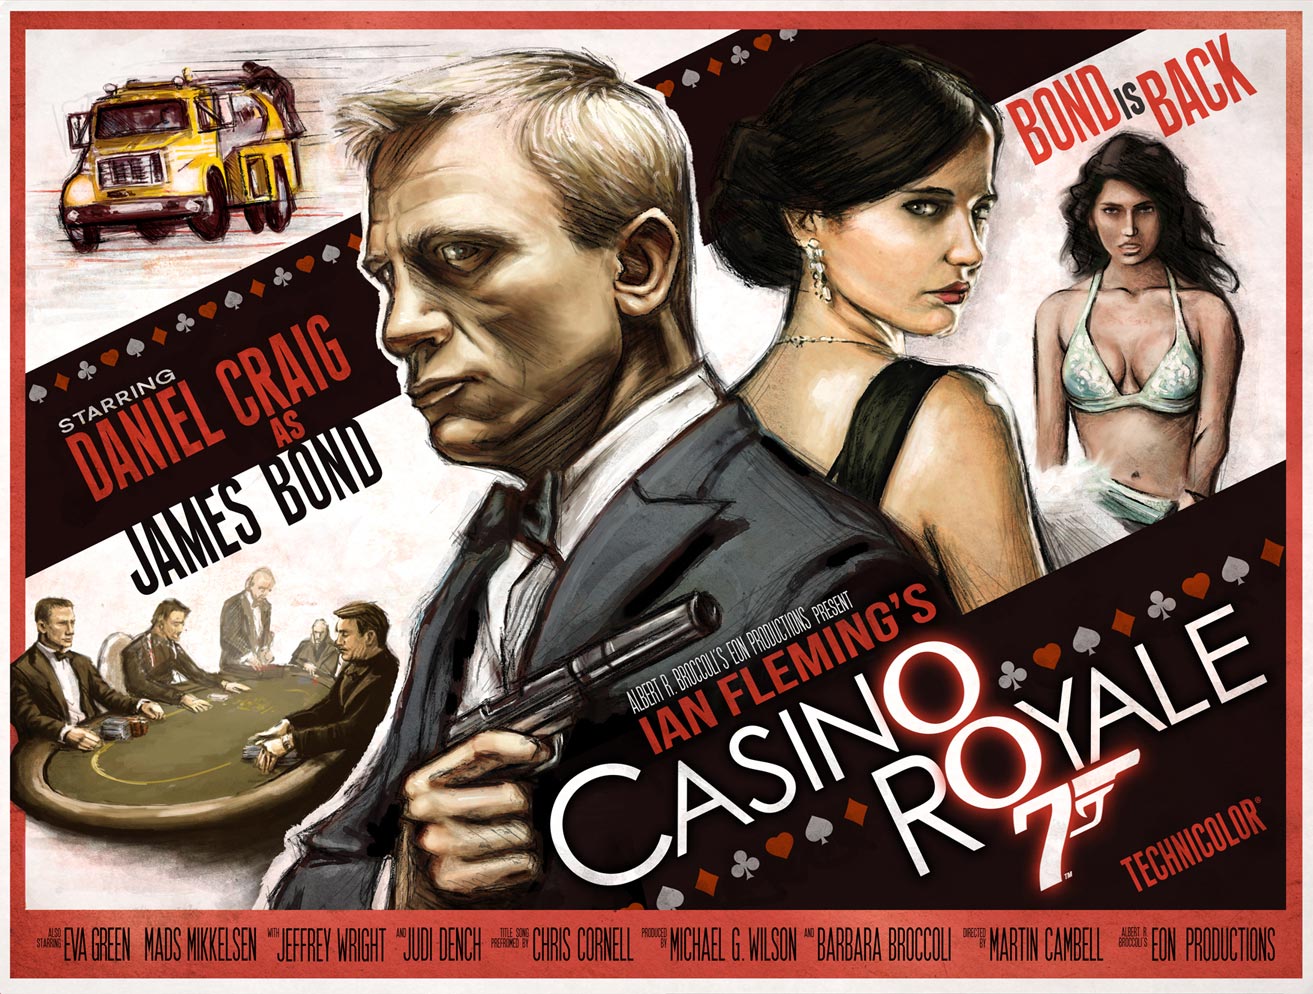 what bond movie was after casino royale